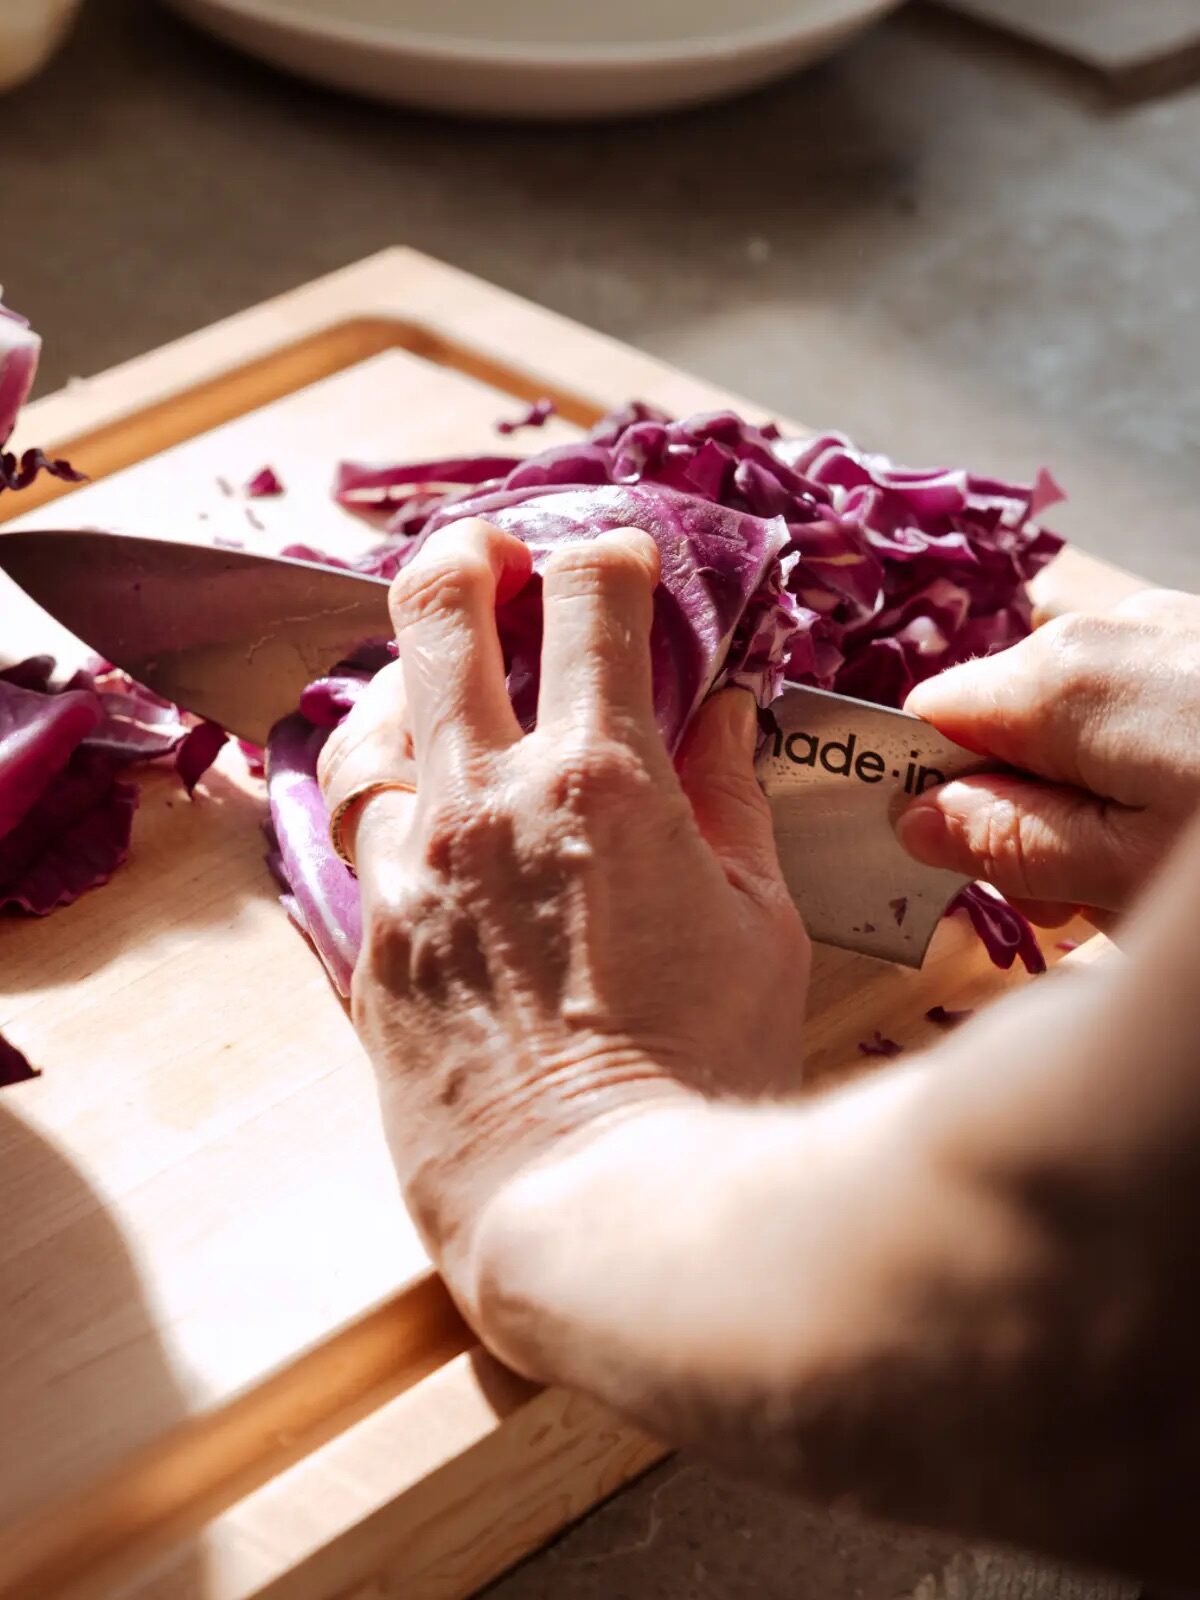 Hands slicing red cabbage on a wooden cutting board.